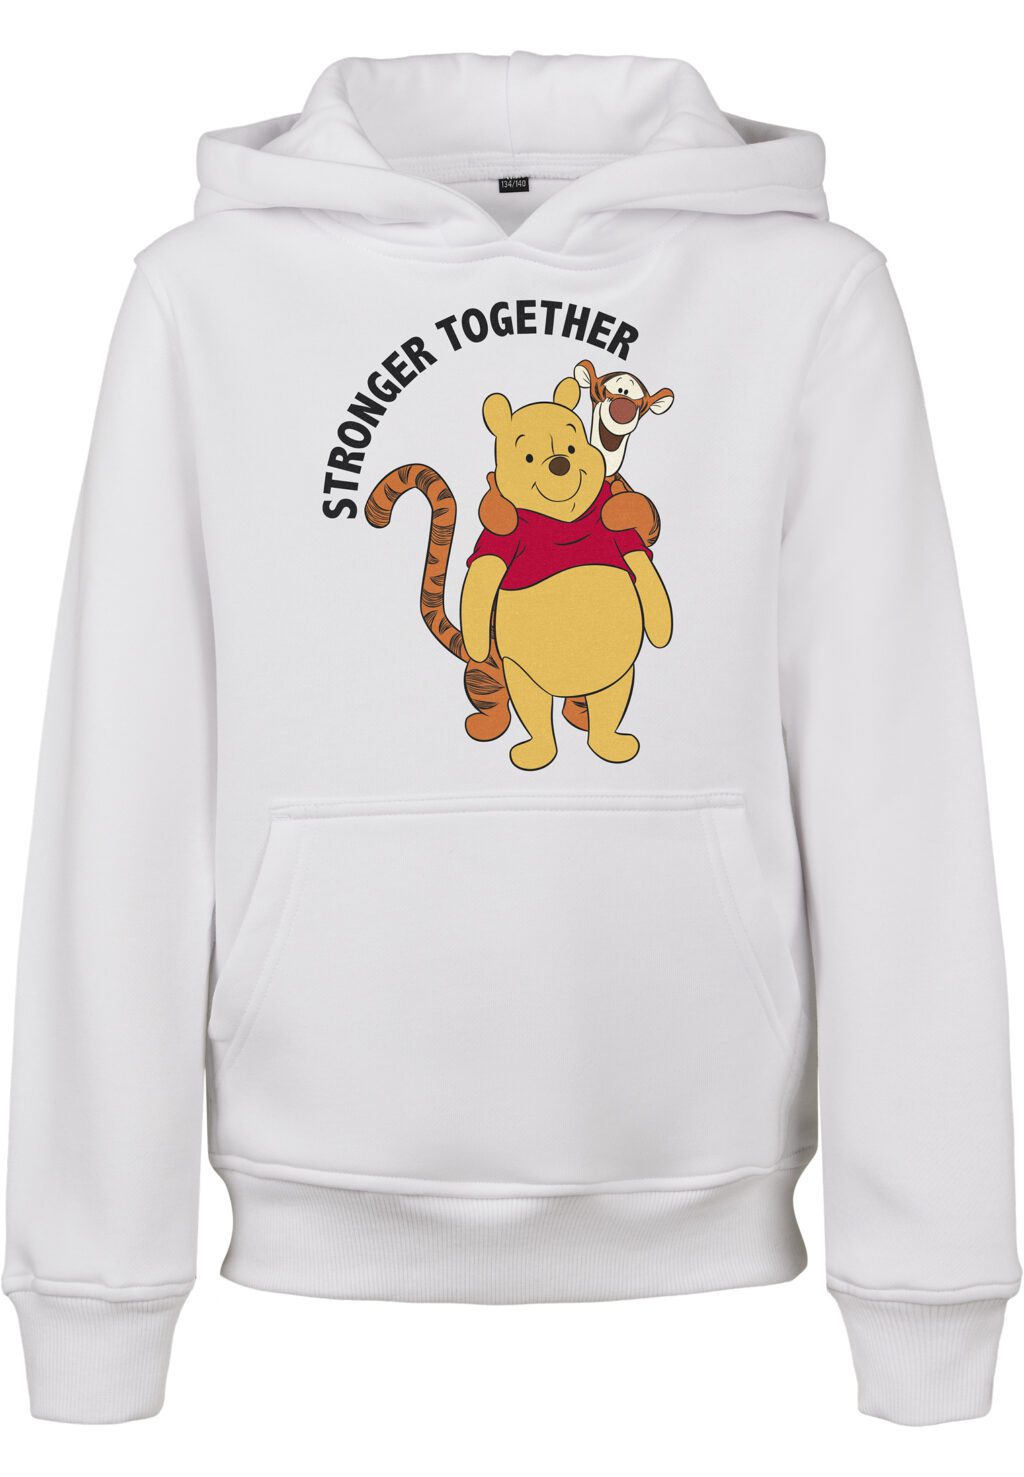 Kids Stronger Together Hoody white MTK097